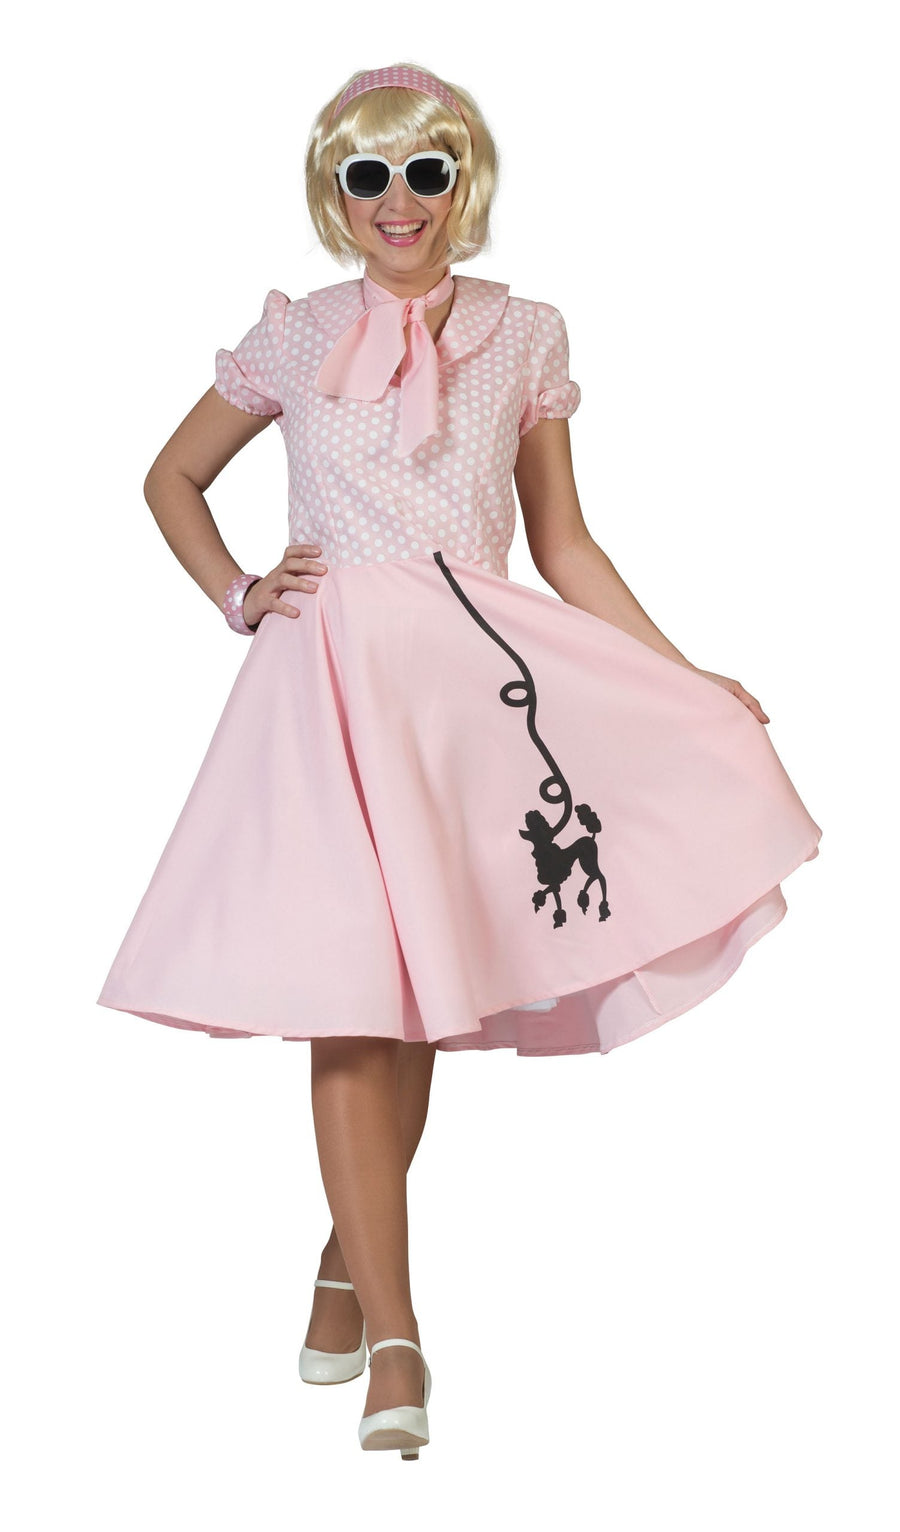 Womens Poodle Dress Pink 40 42 Adult Costume Female Halloween_1